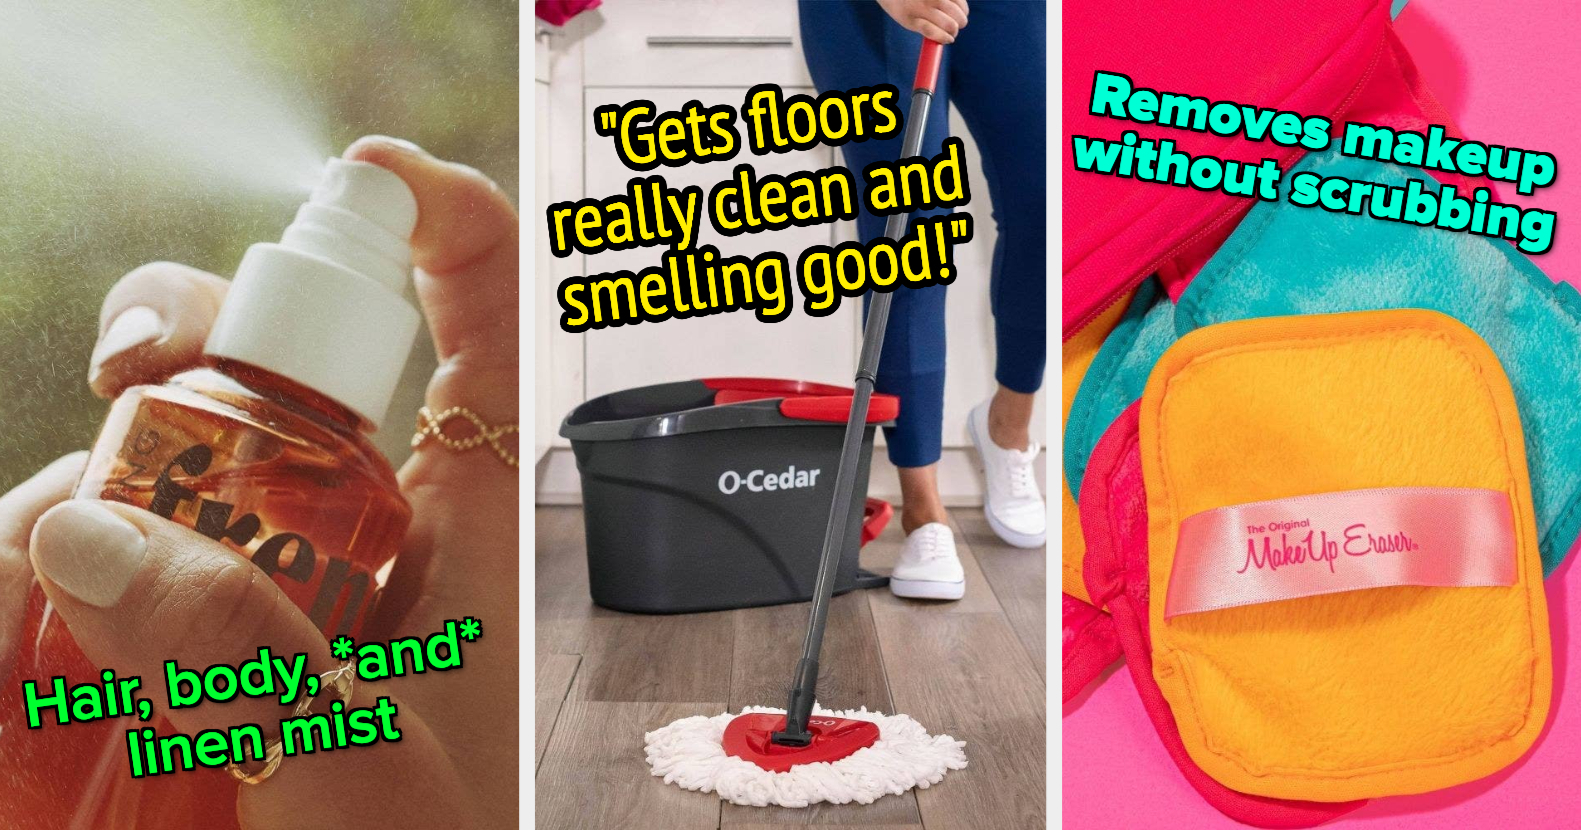 This TikTok cleaning hack actually worked: Rubbermaid Scrubber review